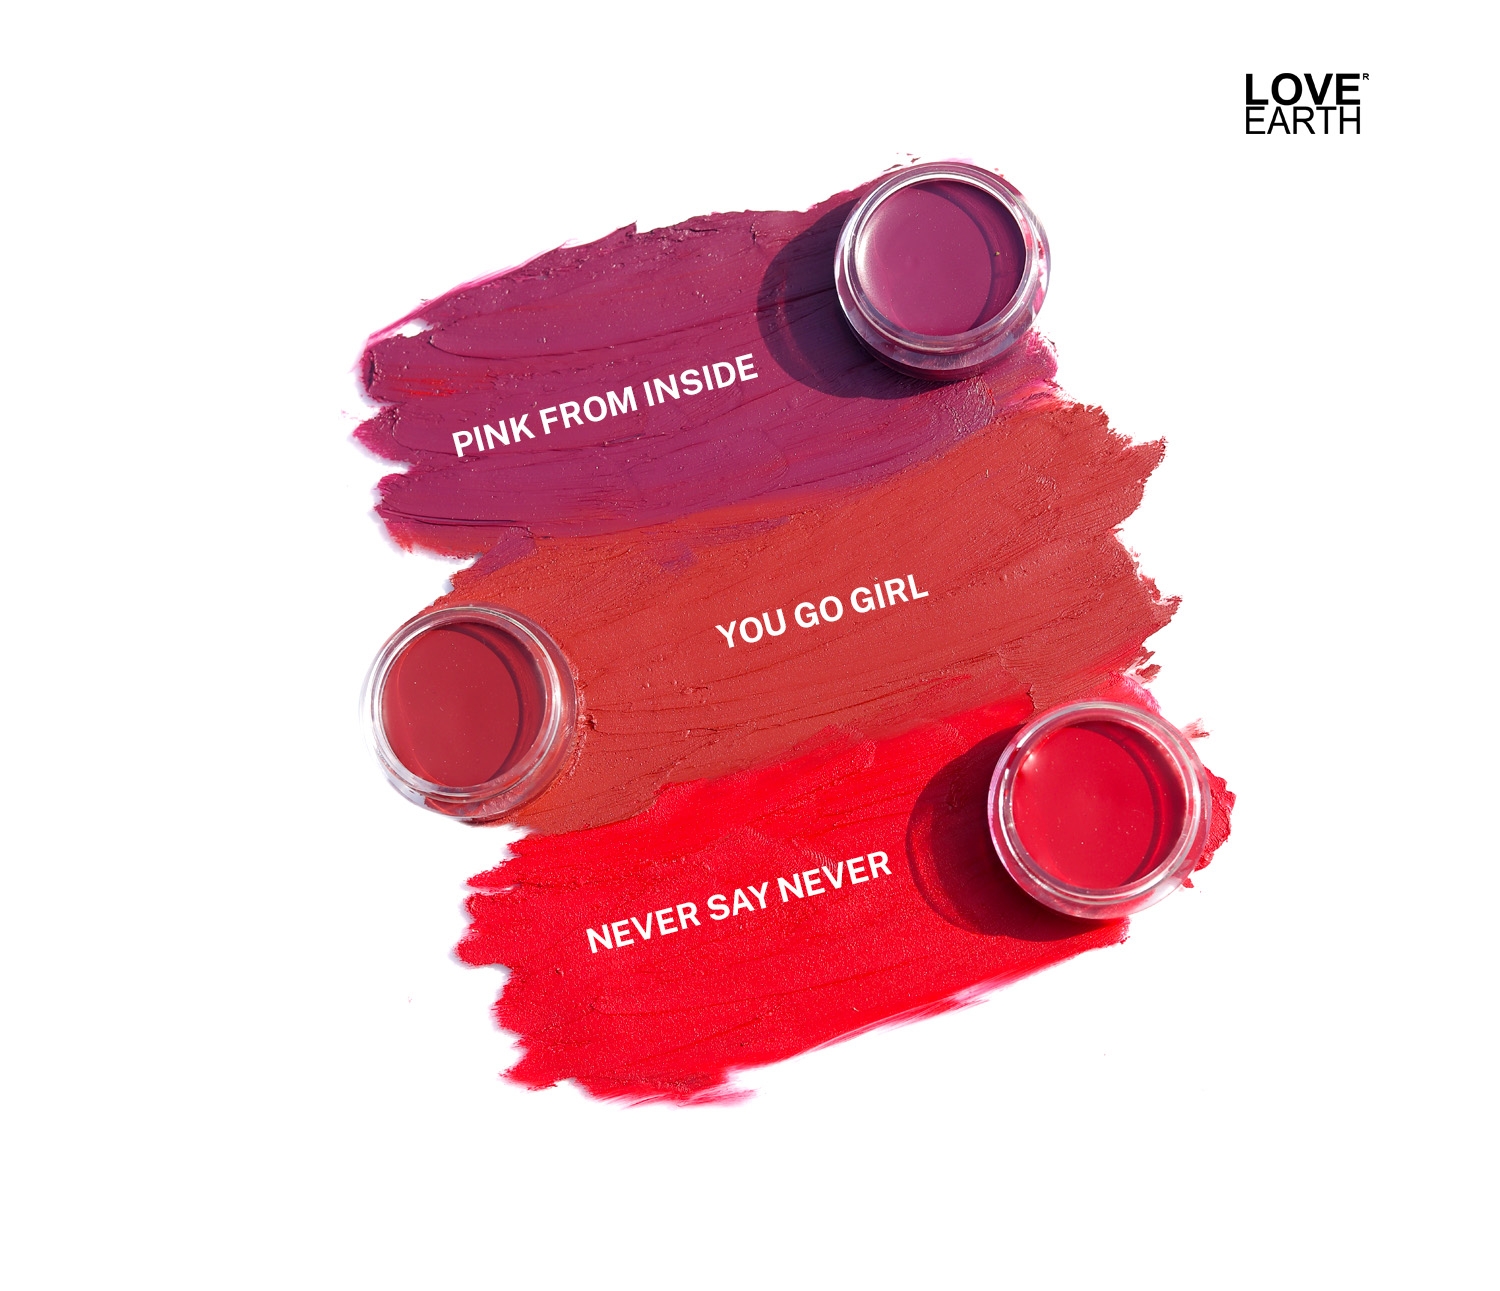 LOVE EARTH | Love Earth Lip Tint & Cheek Tint Multipot - Pink From Inside With Richness Of Essential Oils & Vitamin E For Lips, Eyelids And Cheeks, Creamy Matte - Purple 1